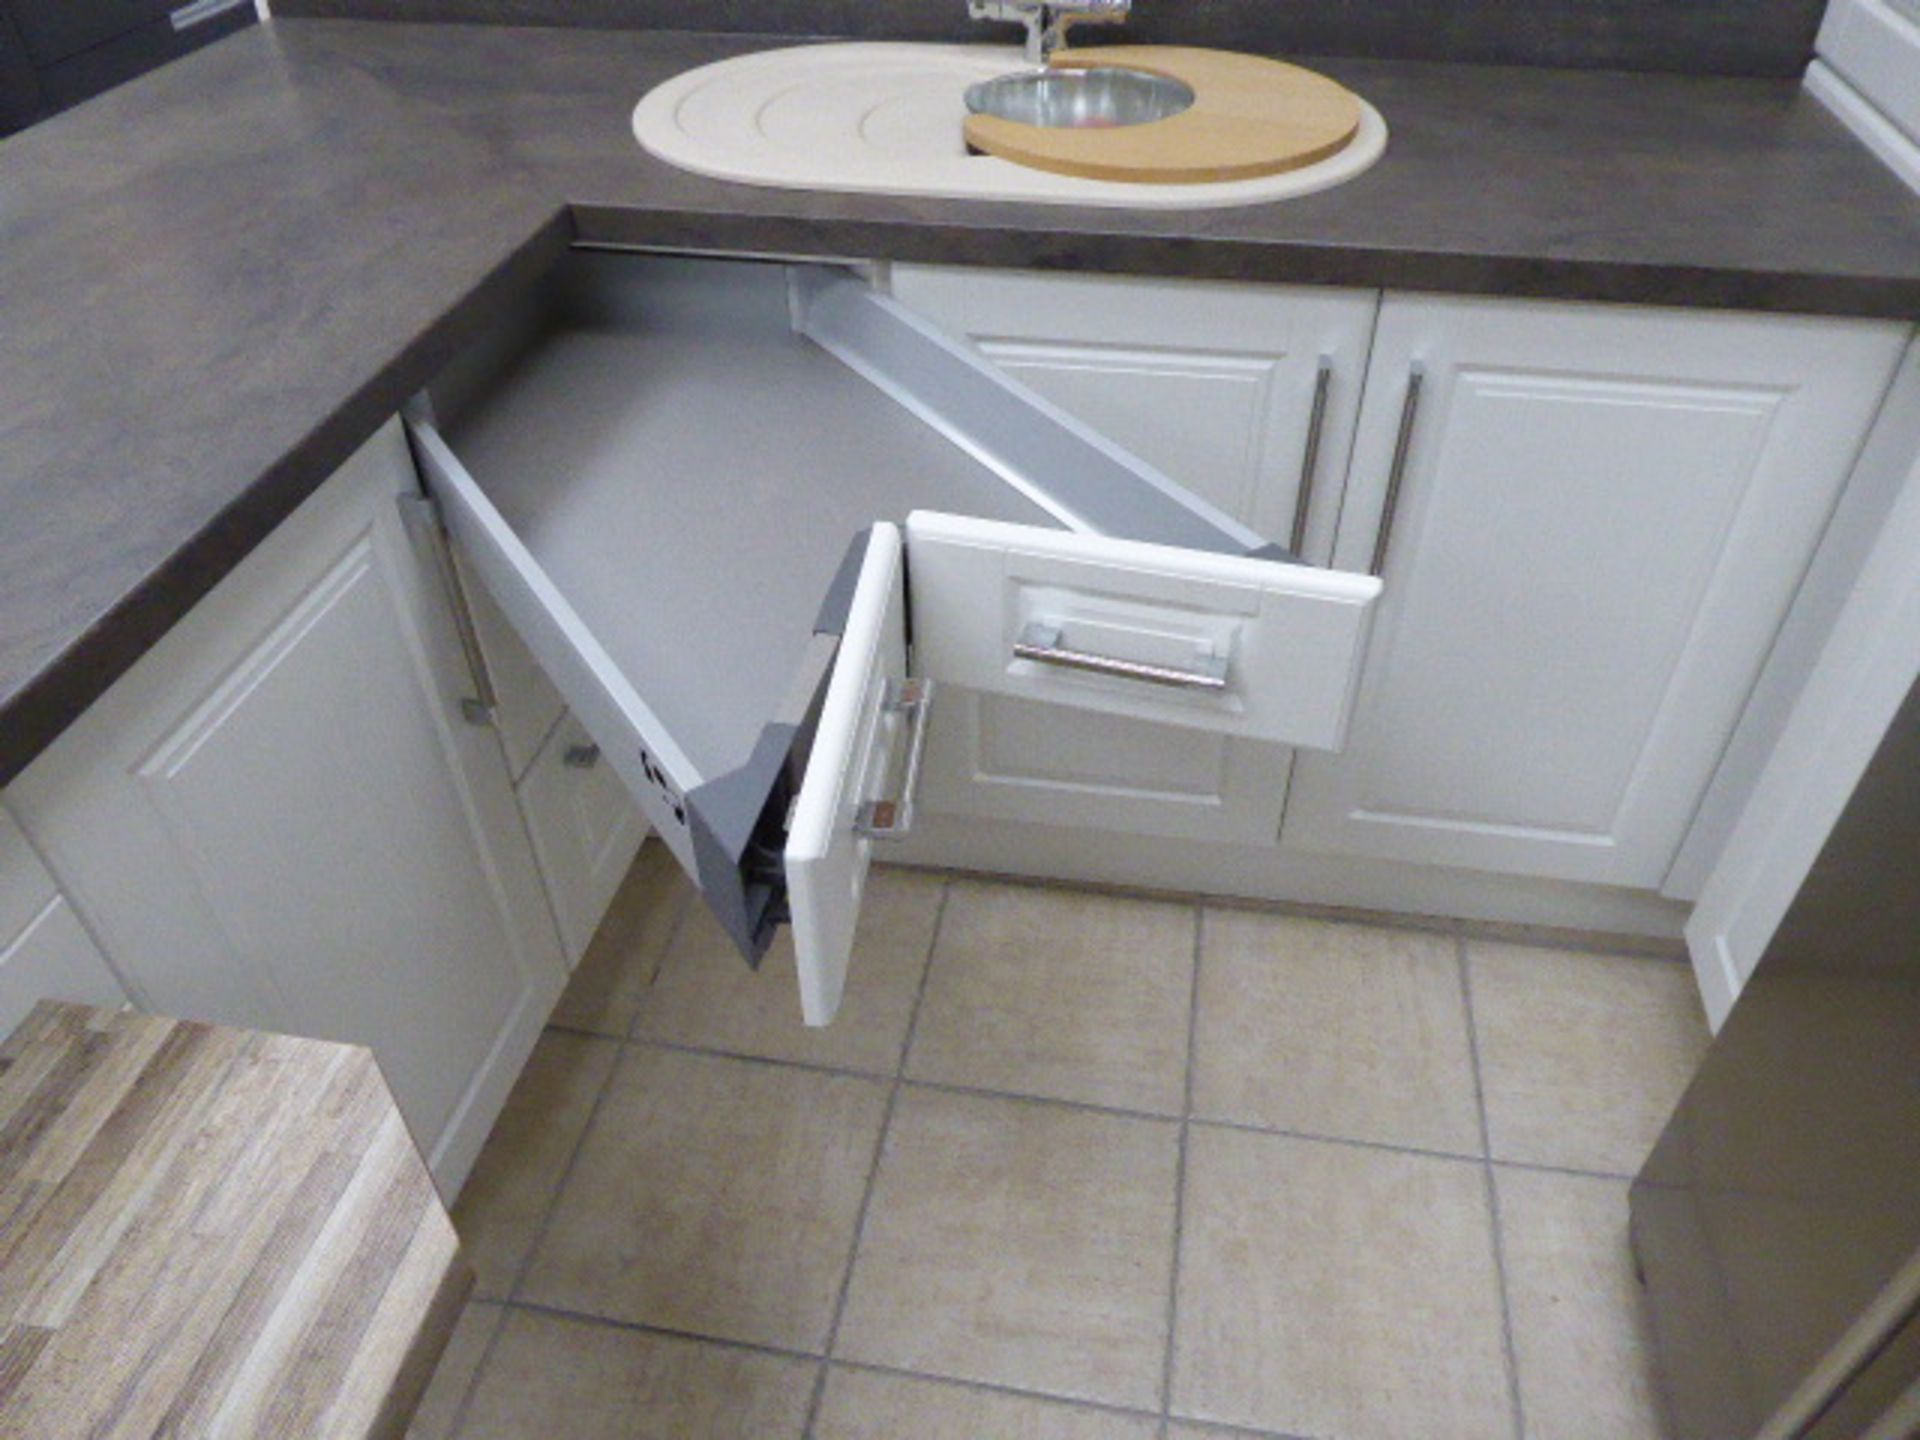 Rochester Alkor matte white kitchen with sand stone effect laminate worktops and block wood effect - Image 3 of 7